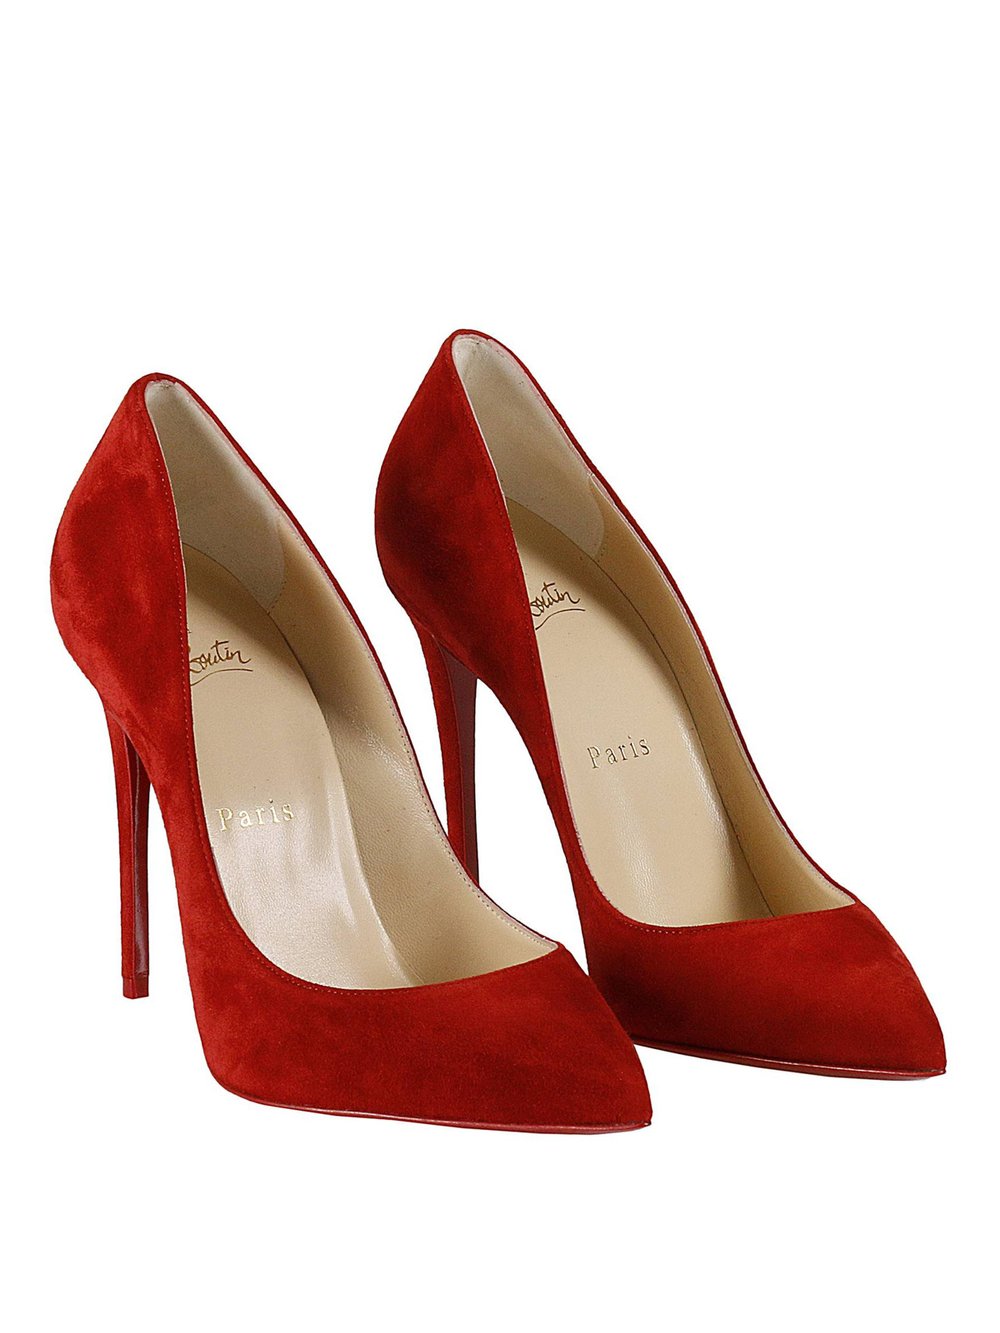 christian-louboutin-online-court-shoes-pigalle-follies-red-suede-pumps-00000119271f00s012.jpg